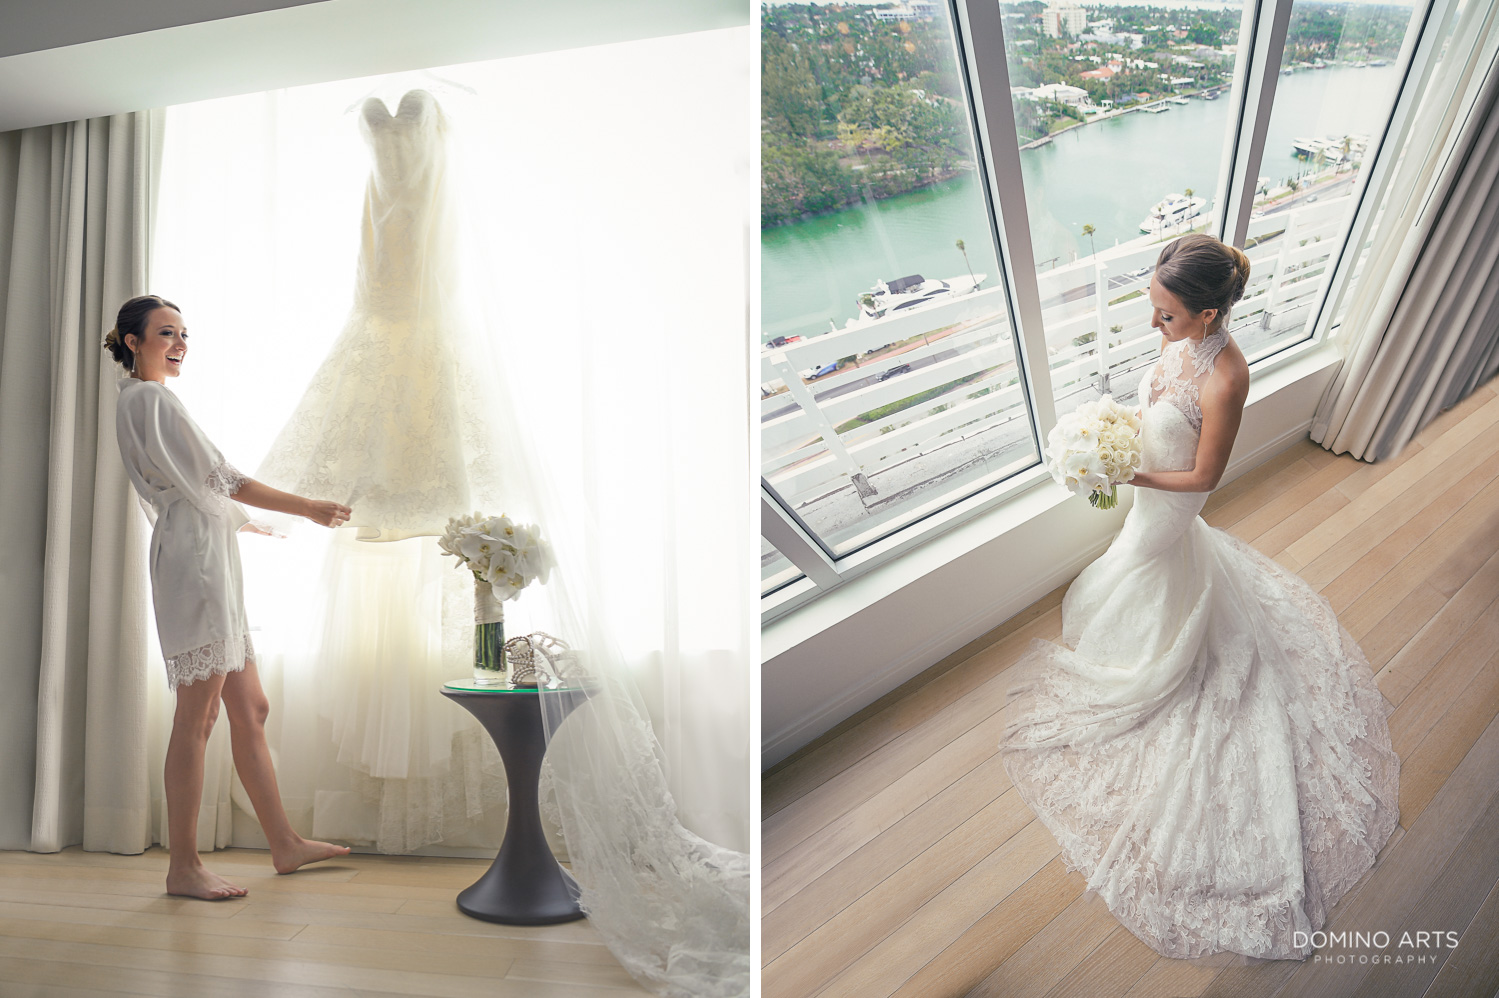 Bride getting ready picture at fontainebleau miami